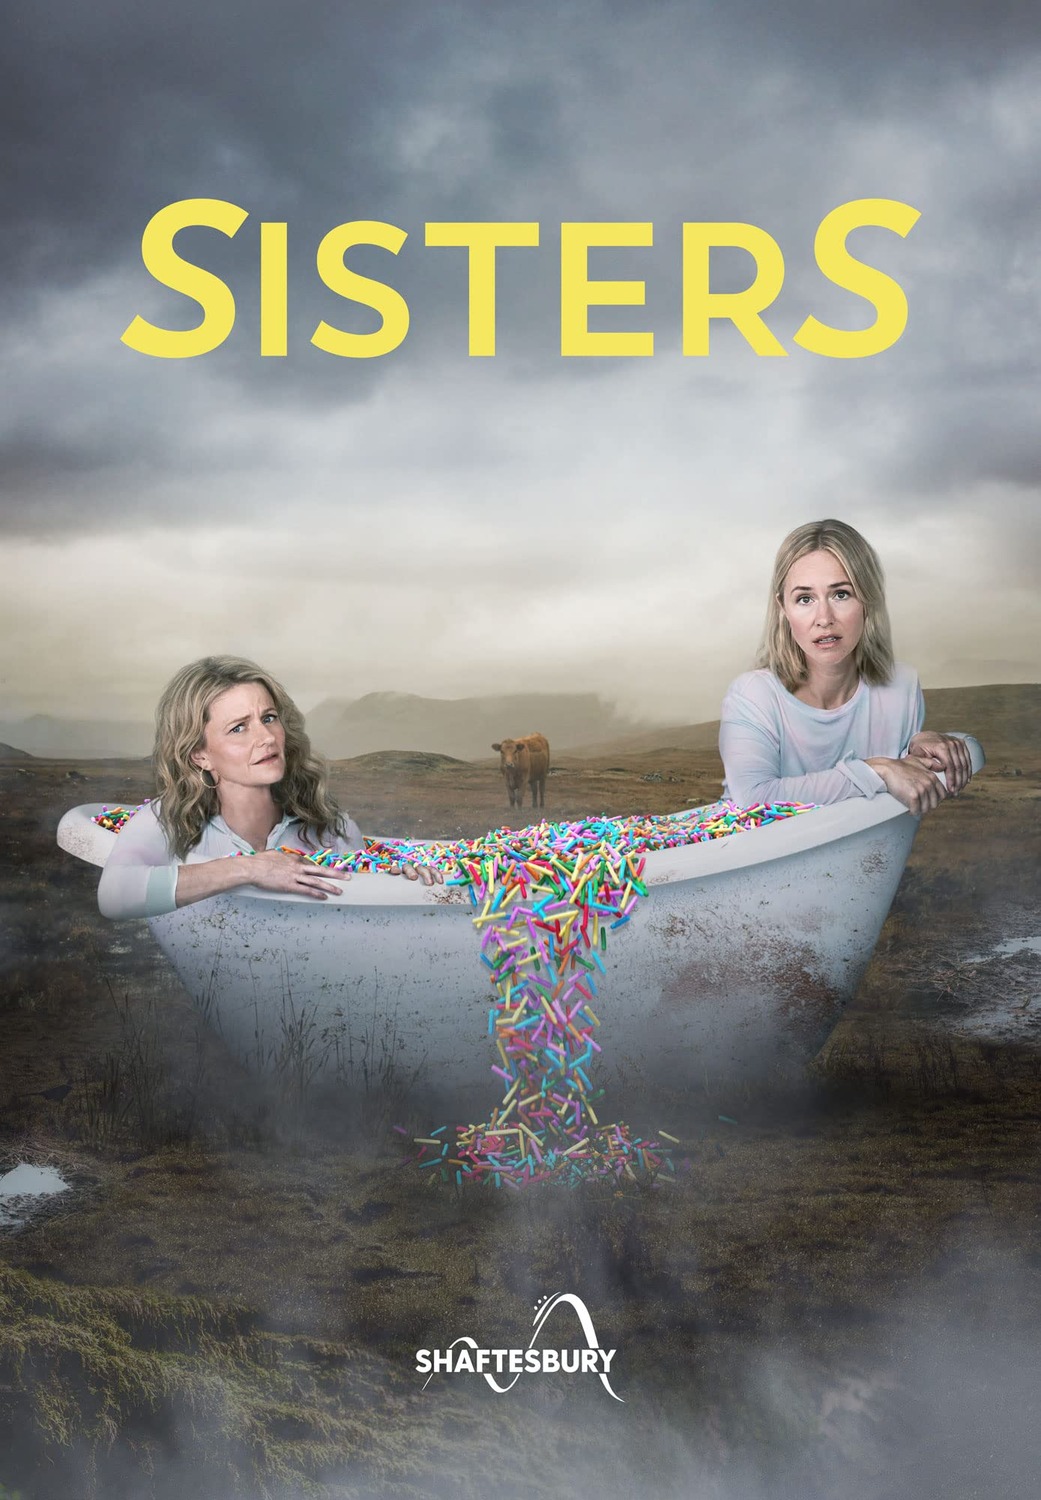 Extra Large TV Poster Image for SisterS 